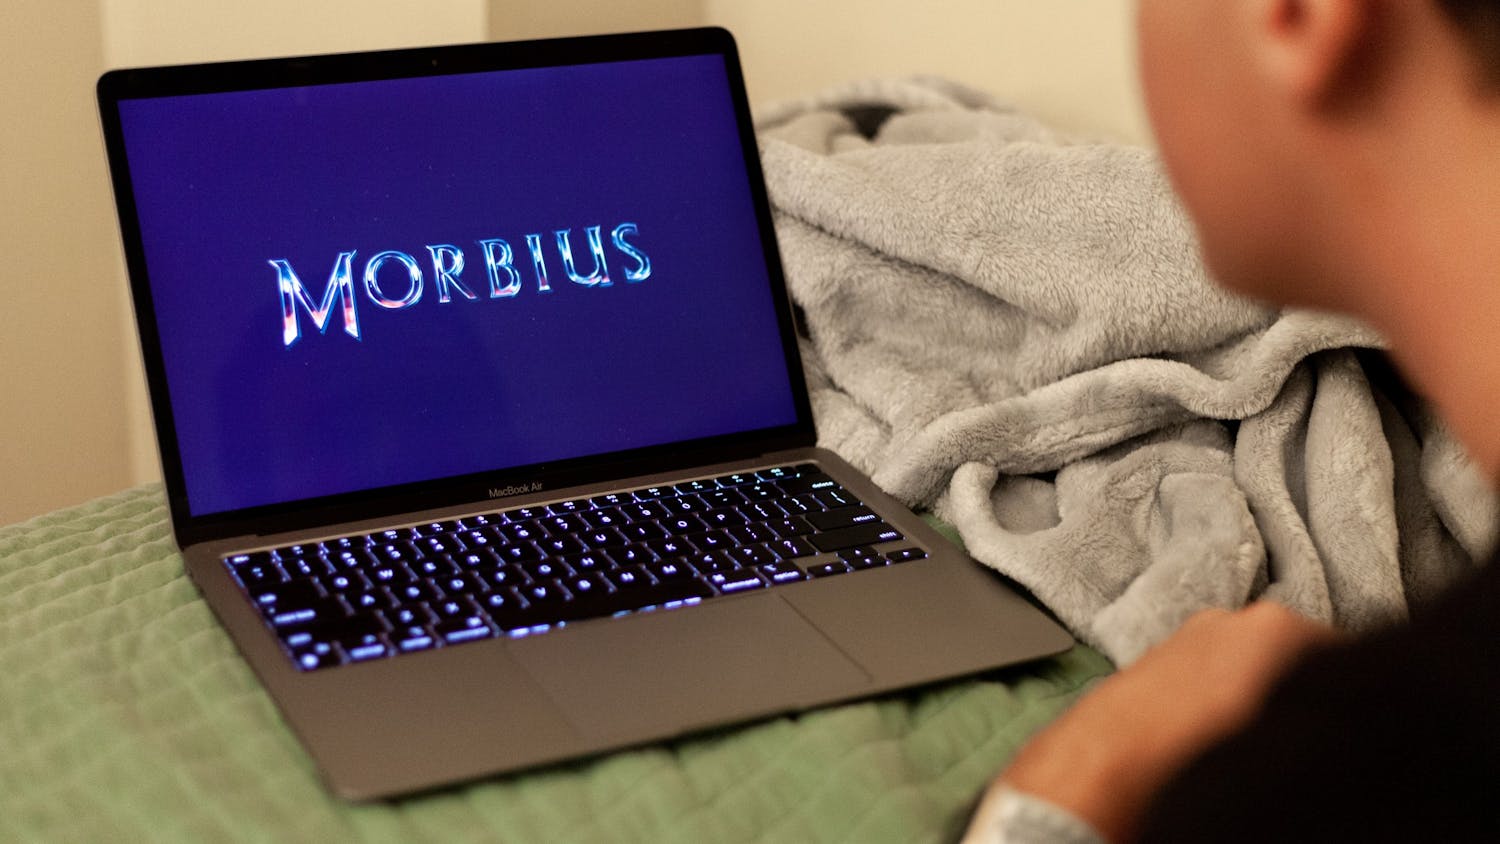 The trailer for Morbius on a computer screen on April 7, 2022. The film was released on April 1, 2022.